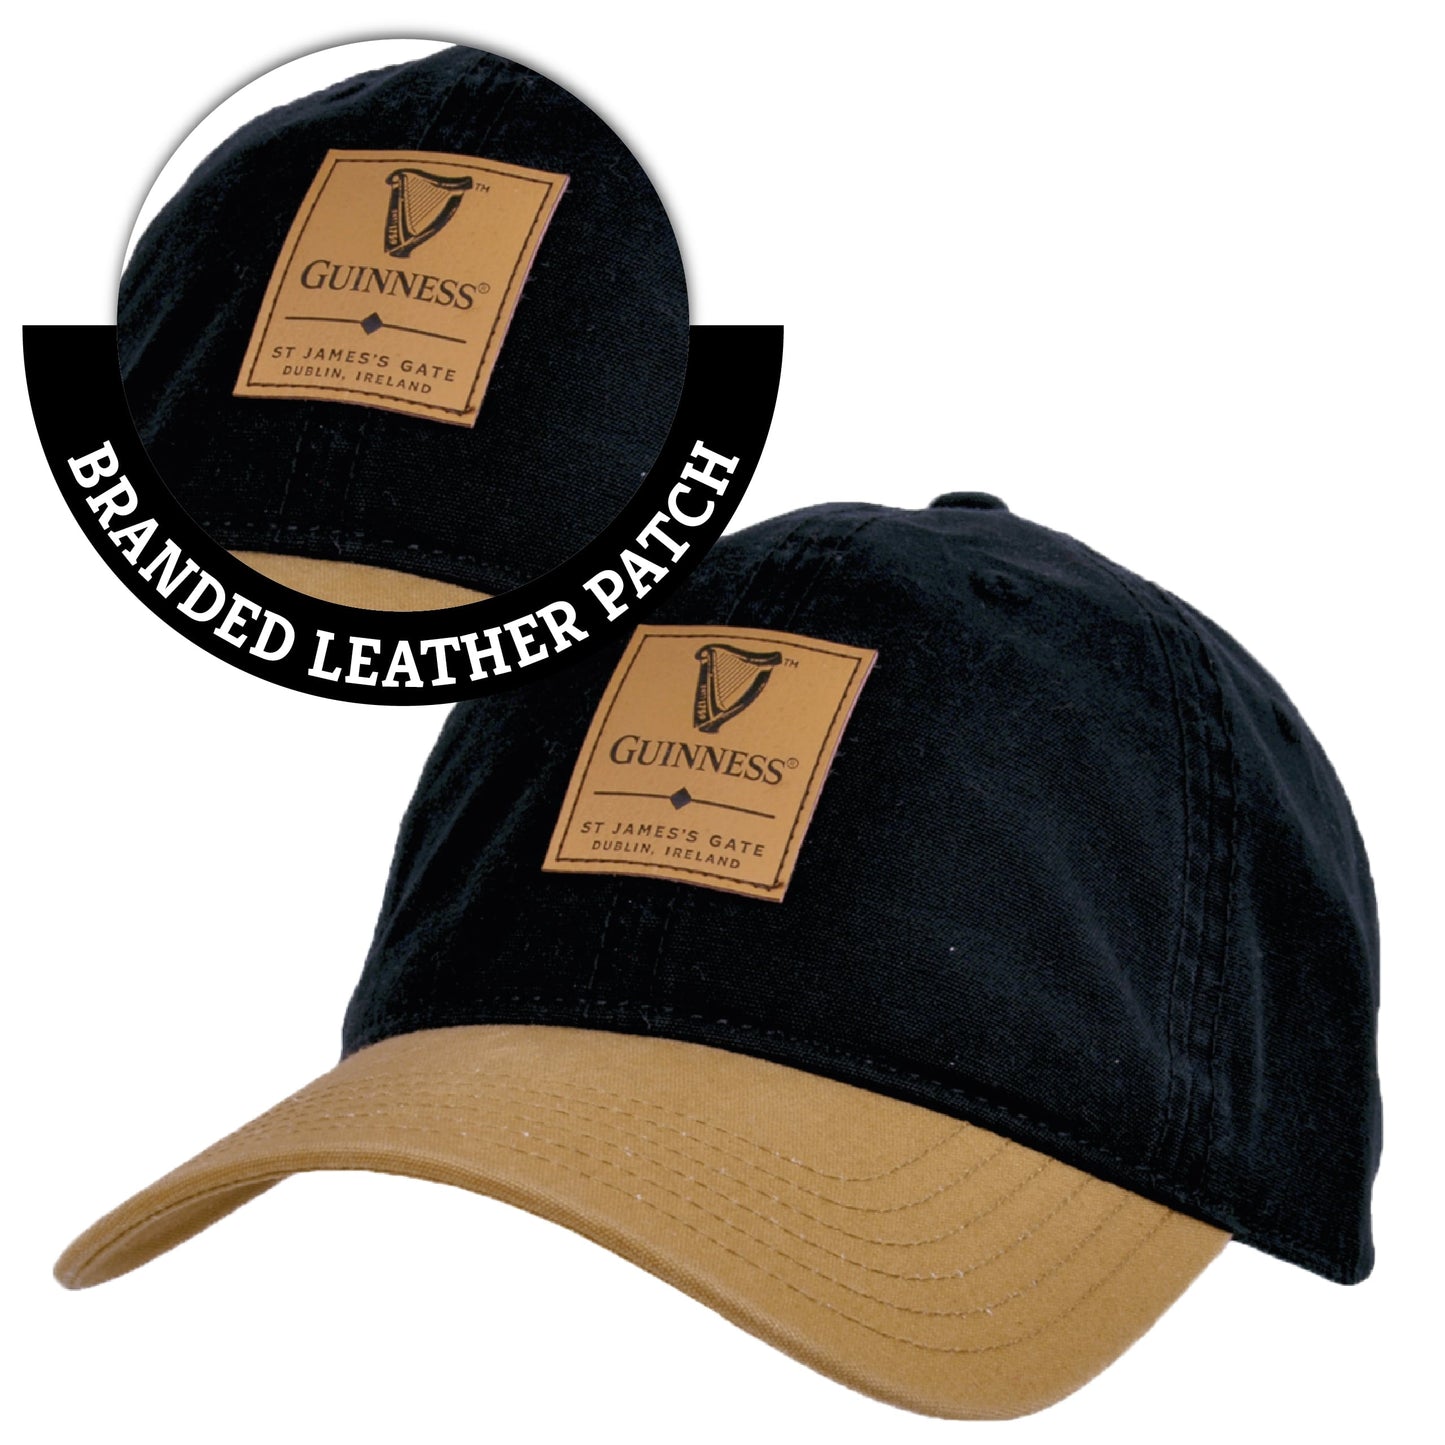 A Guinness UK Premium Black & Camel with Leather Patch Cap featuring the Guinness logo.